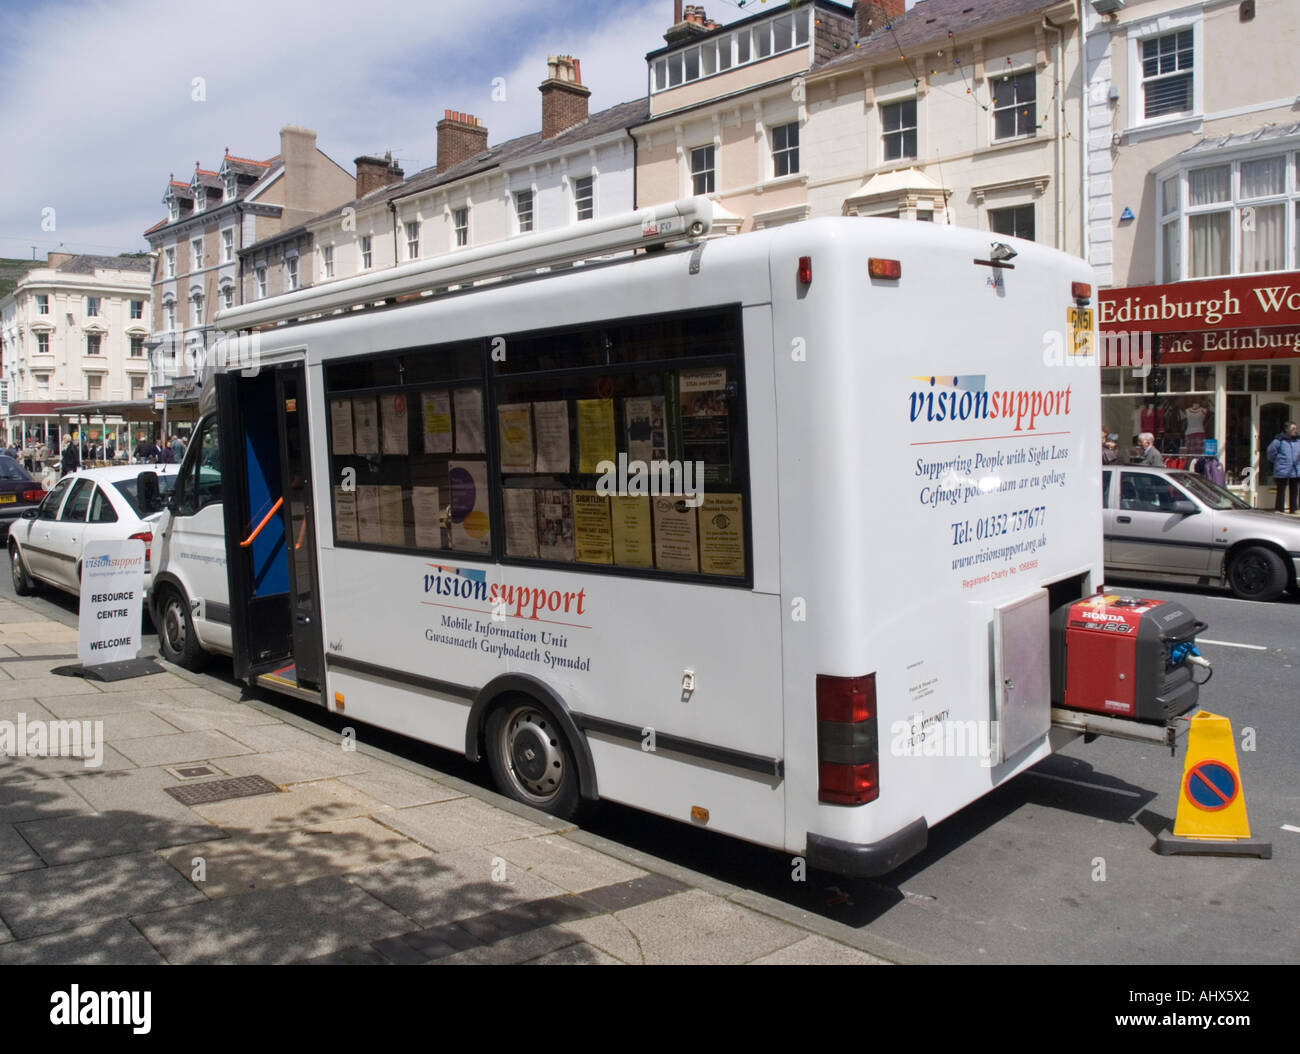 Vision Support Mobile Information Unit van parked in Llandudno high street Conwy North Wales UK Stock Photo